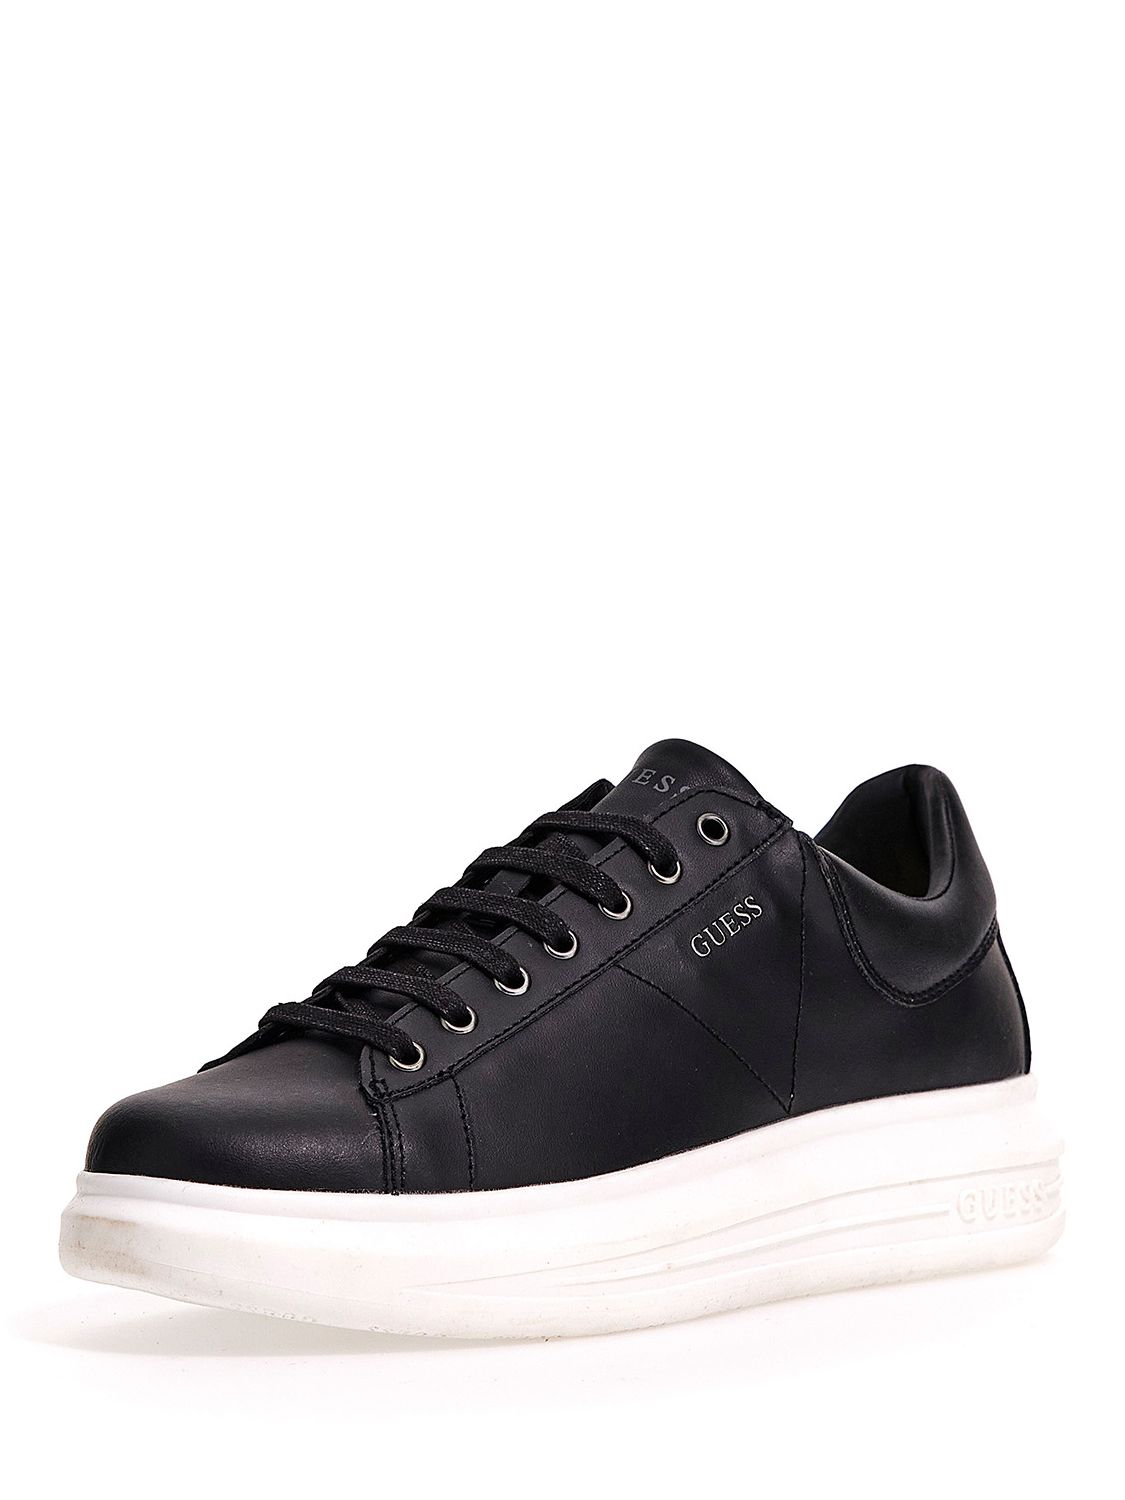 GUESS Vibo Mixed Leather Trainers, Black, 7